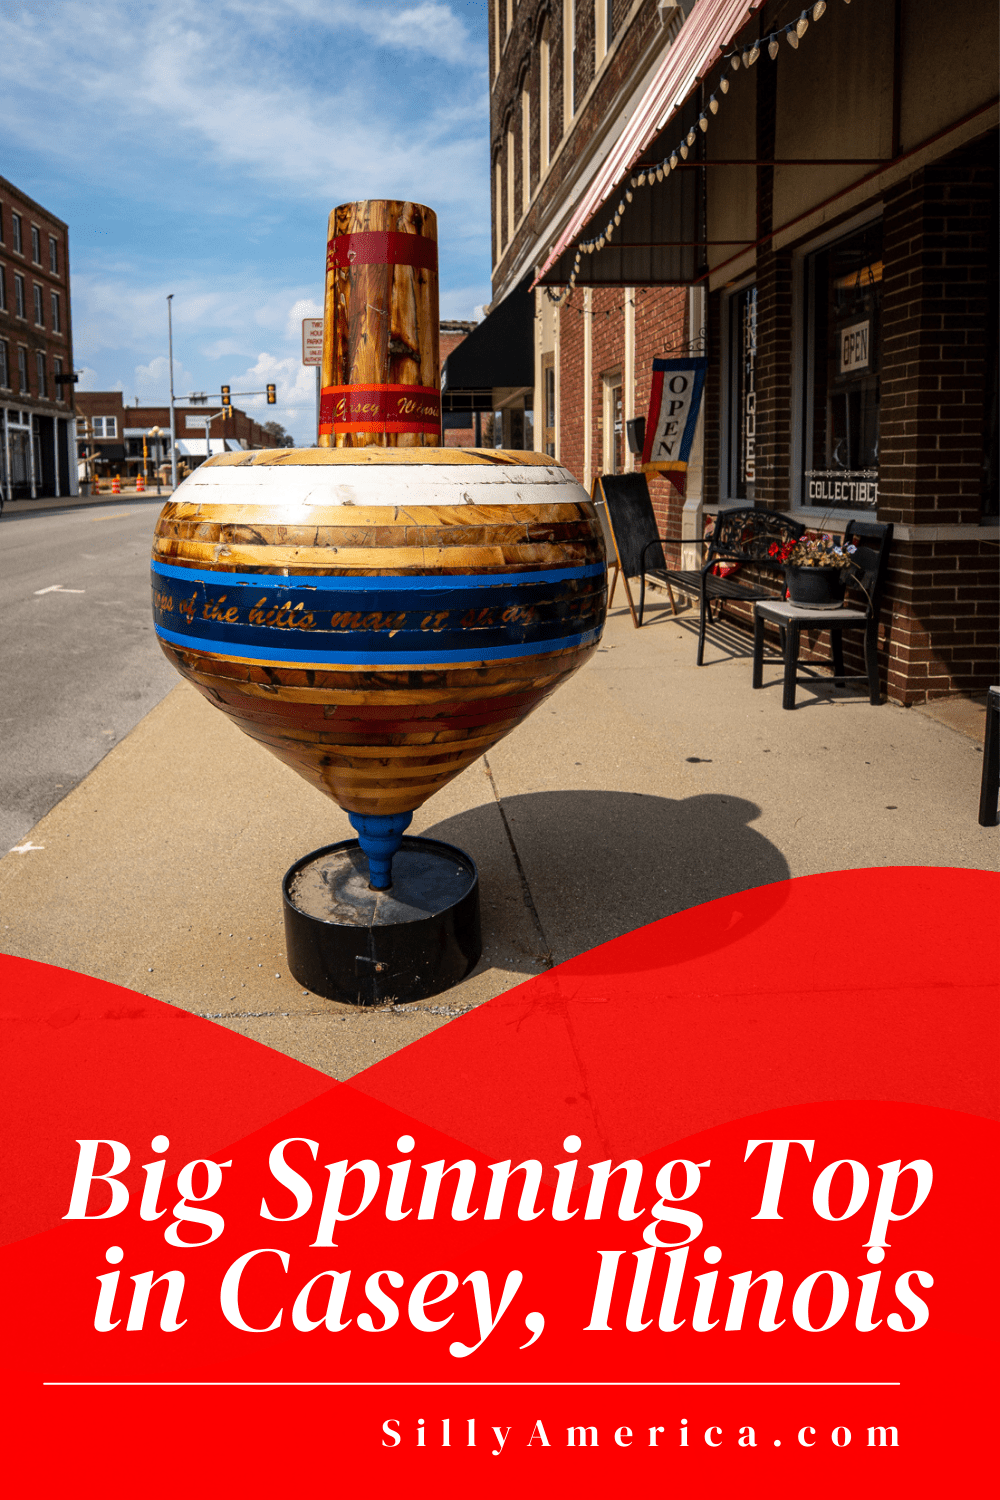 Casey, Illinois is a small town known for its big things. The town is home to over thirty roadside attractions, including twelve record holding world's largest things! While you're in town, be sure to give this big thing a spin, literally! It's the Big Spinning Top.  #IllinoisRoadsideAttractions #IllinoisRoadsideAttraction #RoadsideAttractions #RoadsideAttraction #RoadTrip #IllinoisRoadTrip #IllinoisWeekendGetaways #IllinoisWithKids #IllinoisRoadTripTravel 